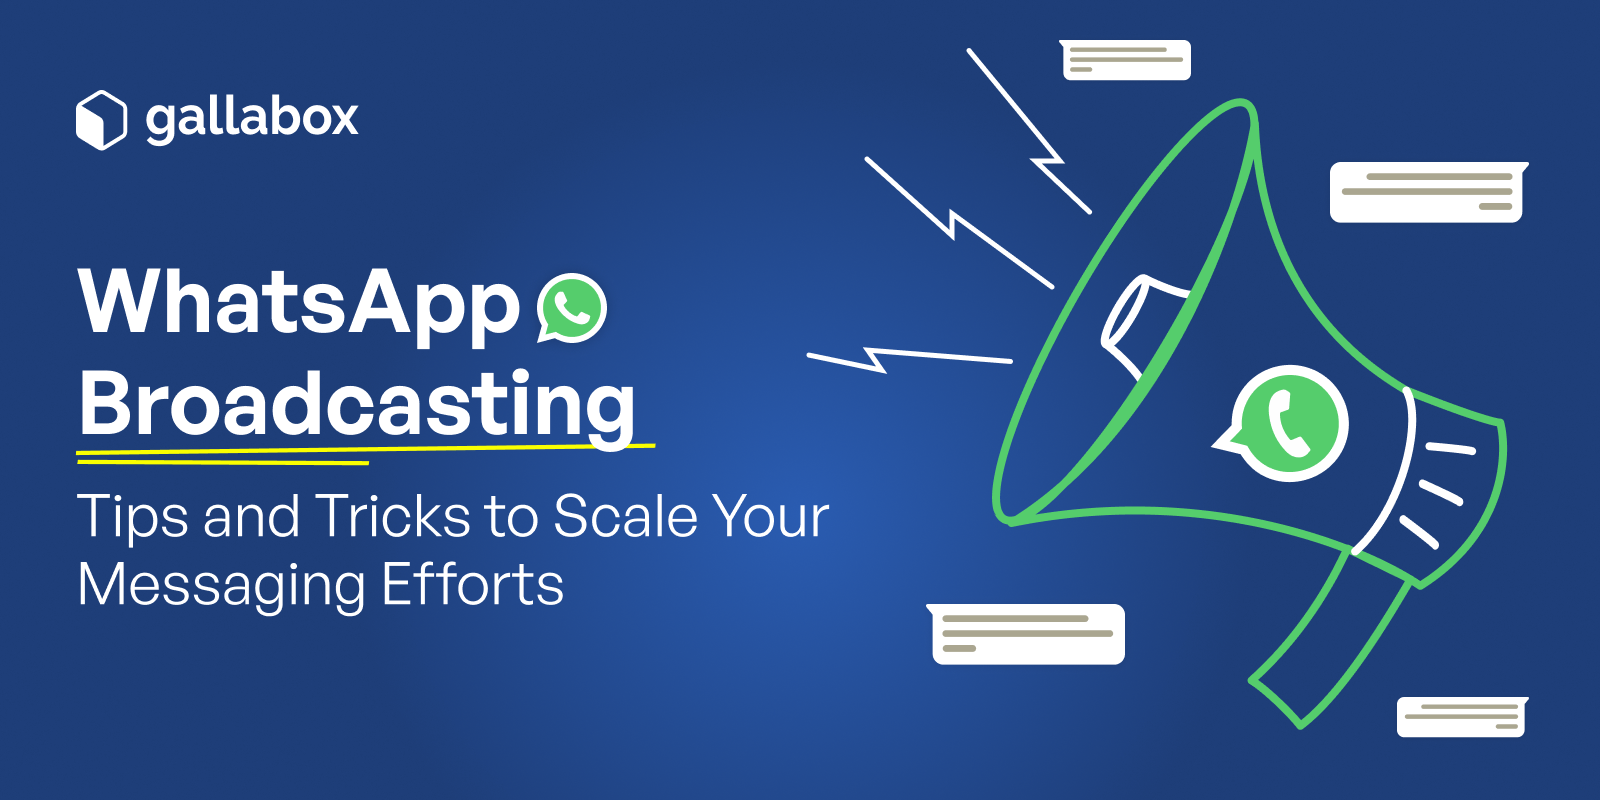 WhatsApp Broadcasting: Tips and Tricks to Scale Your Messaging Efforts